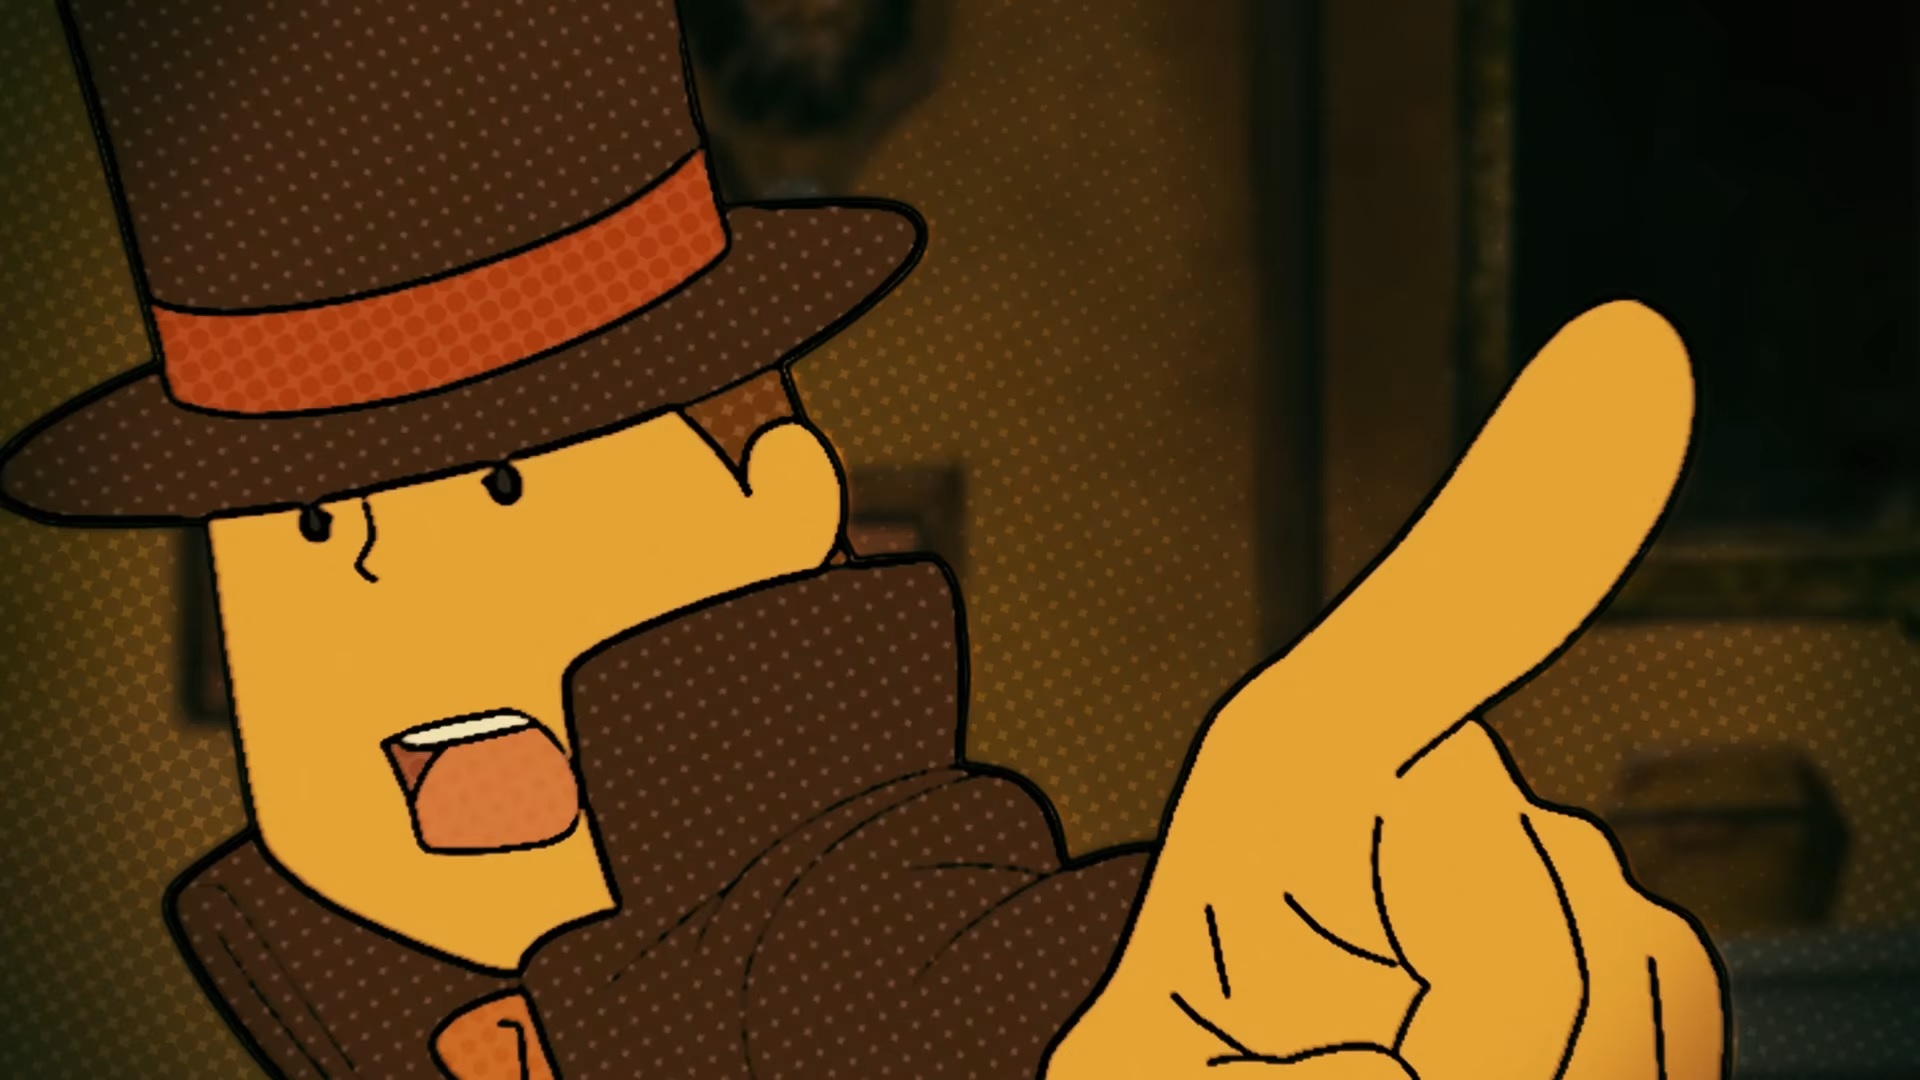 Professor Layton pointing accusingly in a screenshot from "Professor Layton and the Curious Village," 2007 (Image from Level-5/Nintendo).